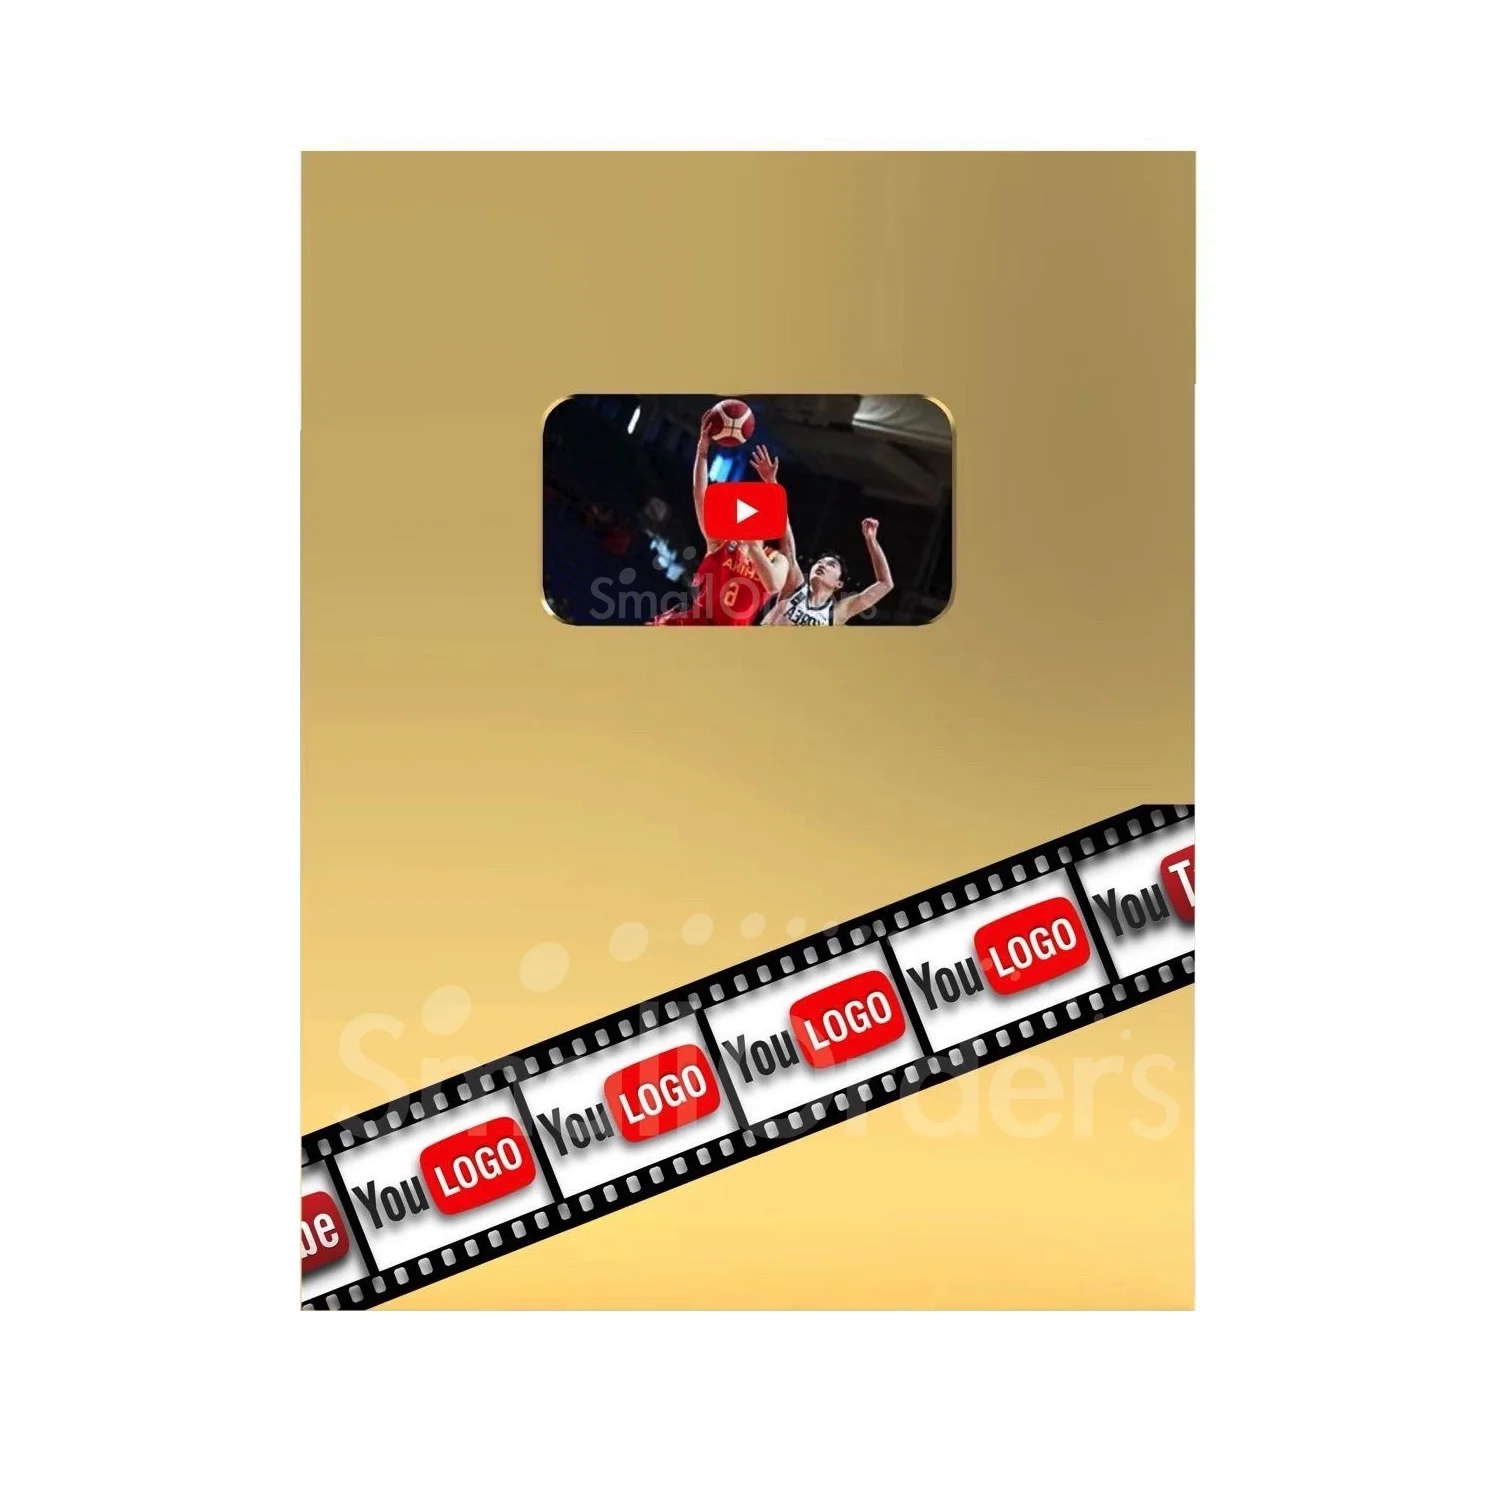 Youtubu Play Button plaque USB SD card 12V DC input 32G Memory smart Android optional lcd video award plaques